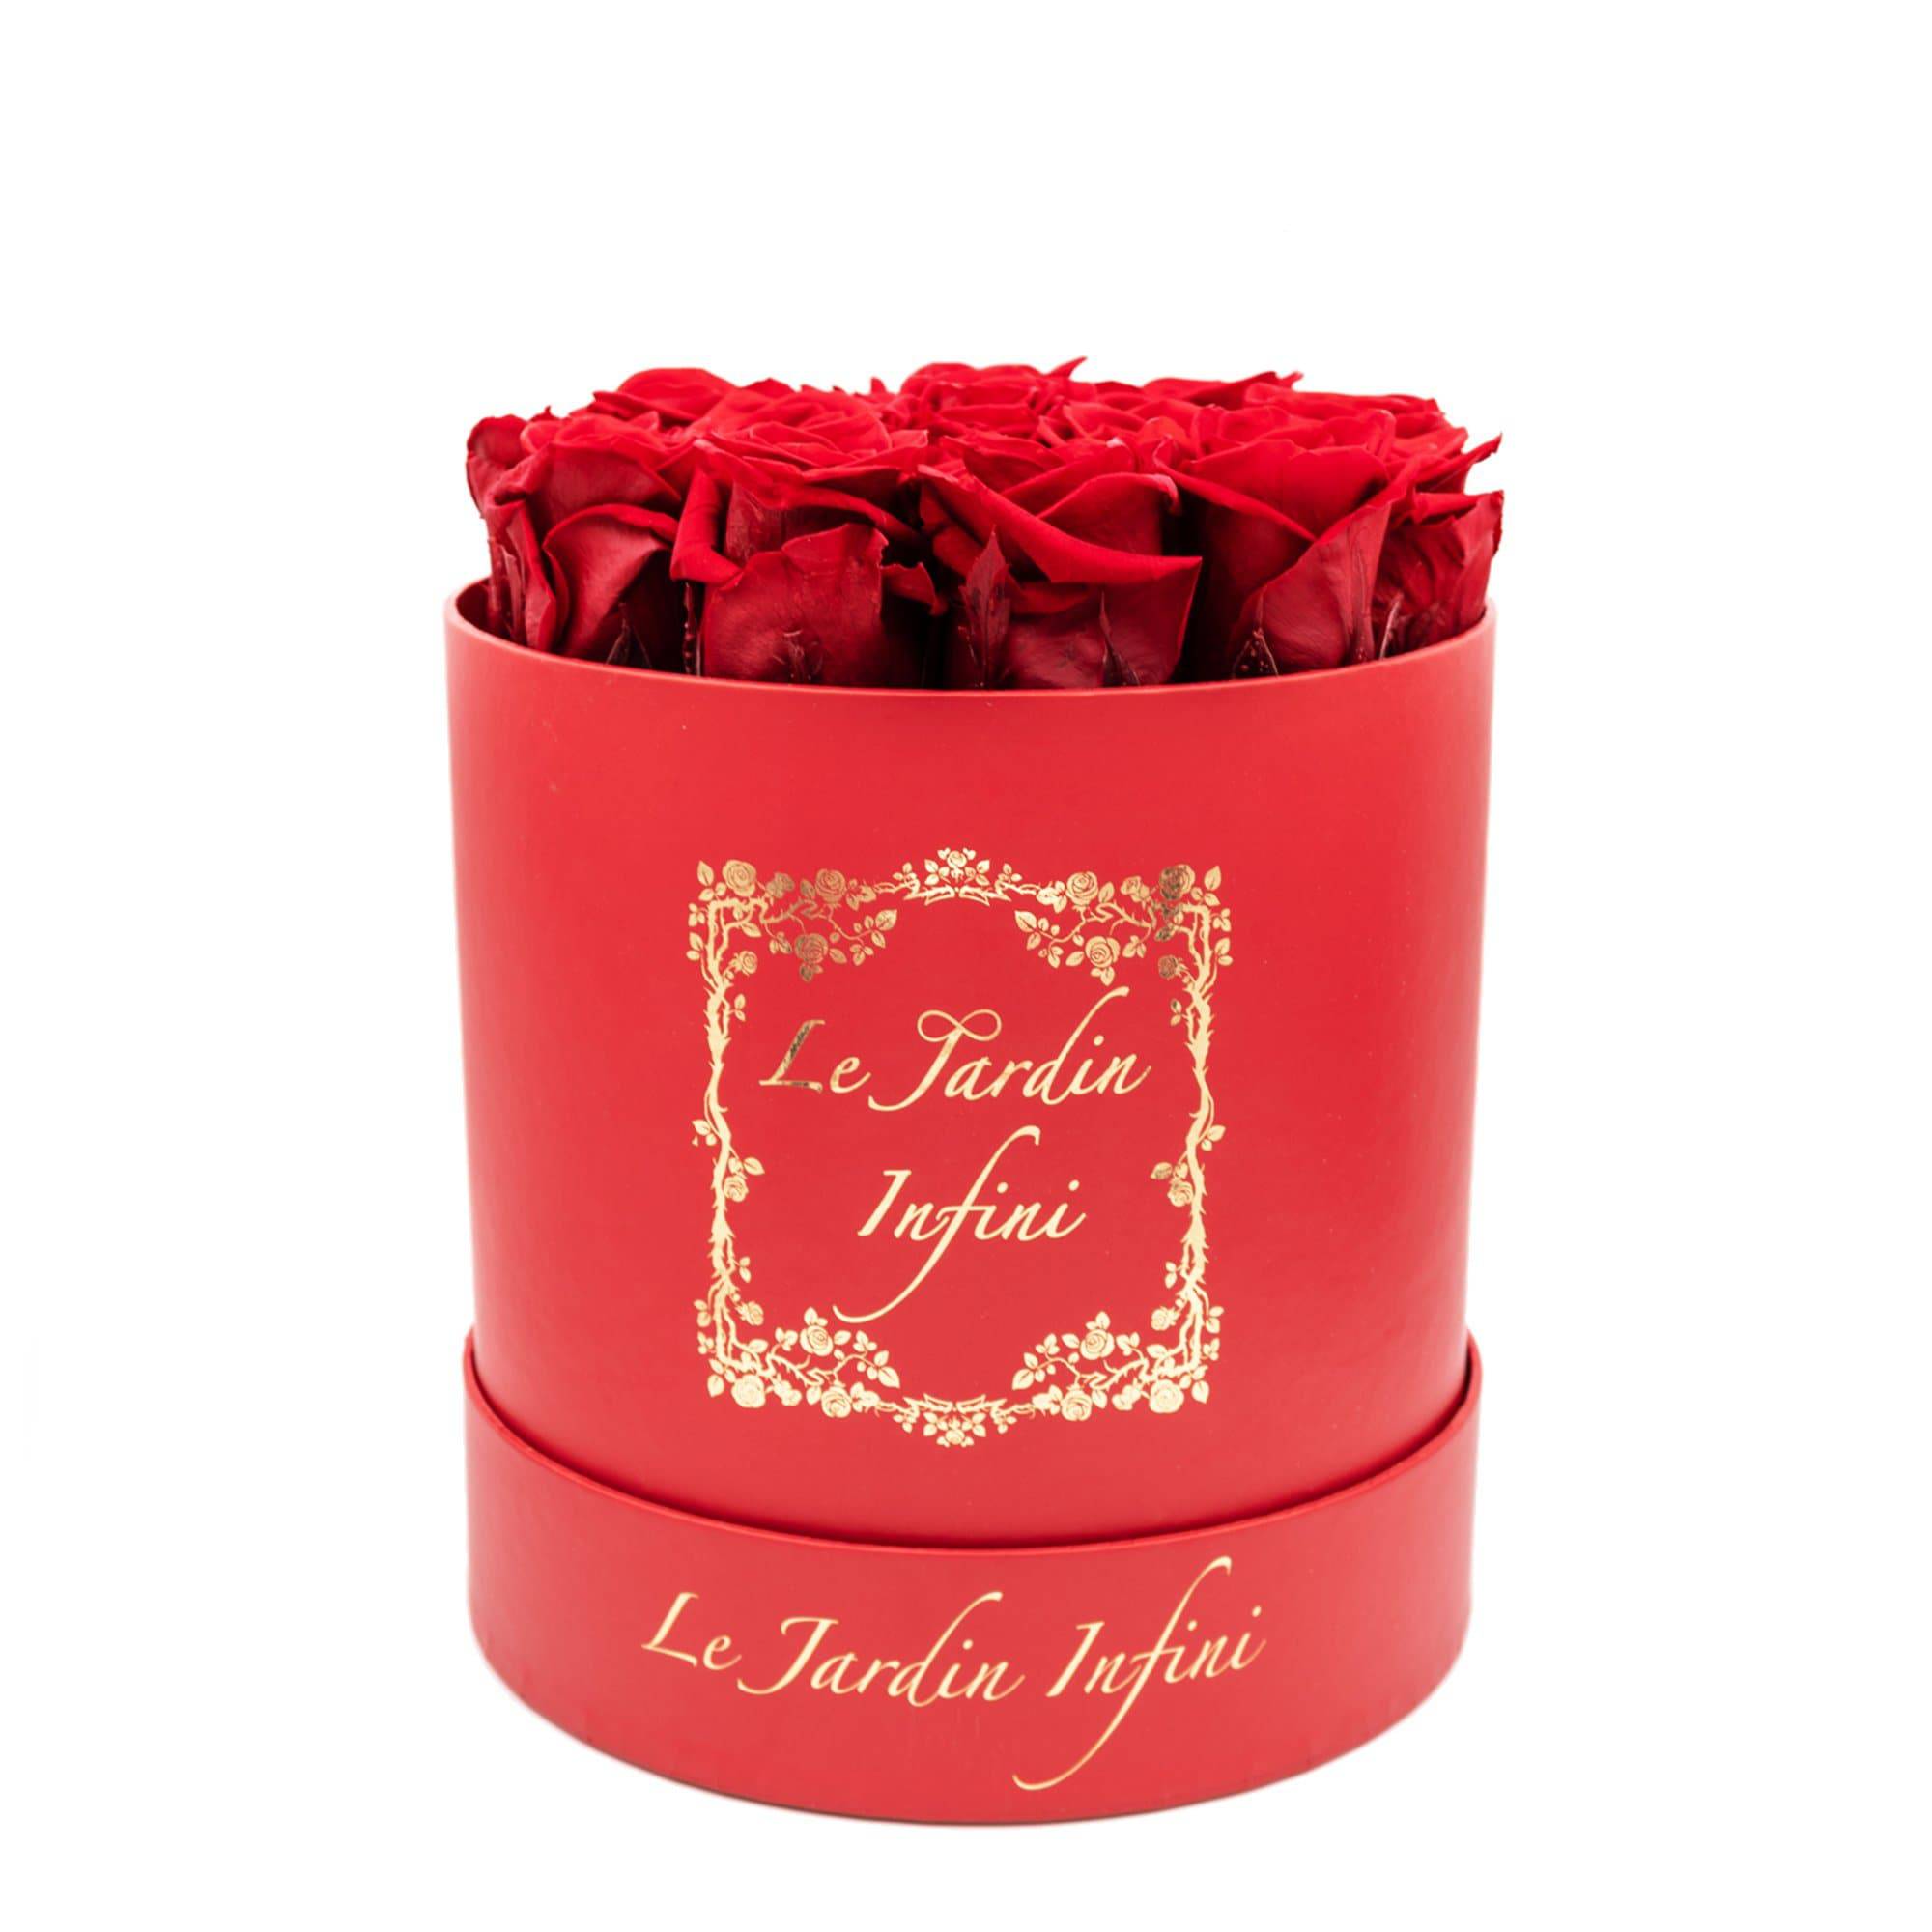 Red Preserved Roses - Medium Round Red Box - Le Jardin Infini Roses in a Box